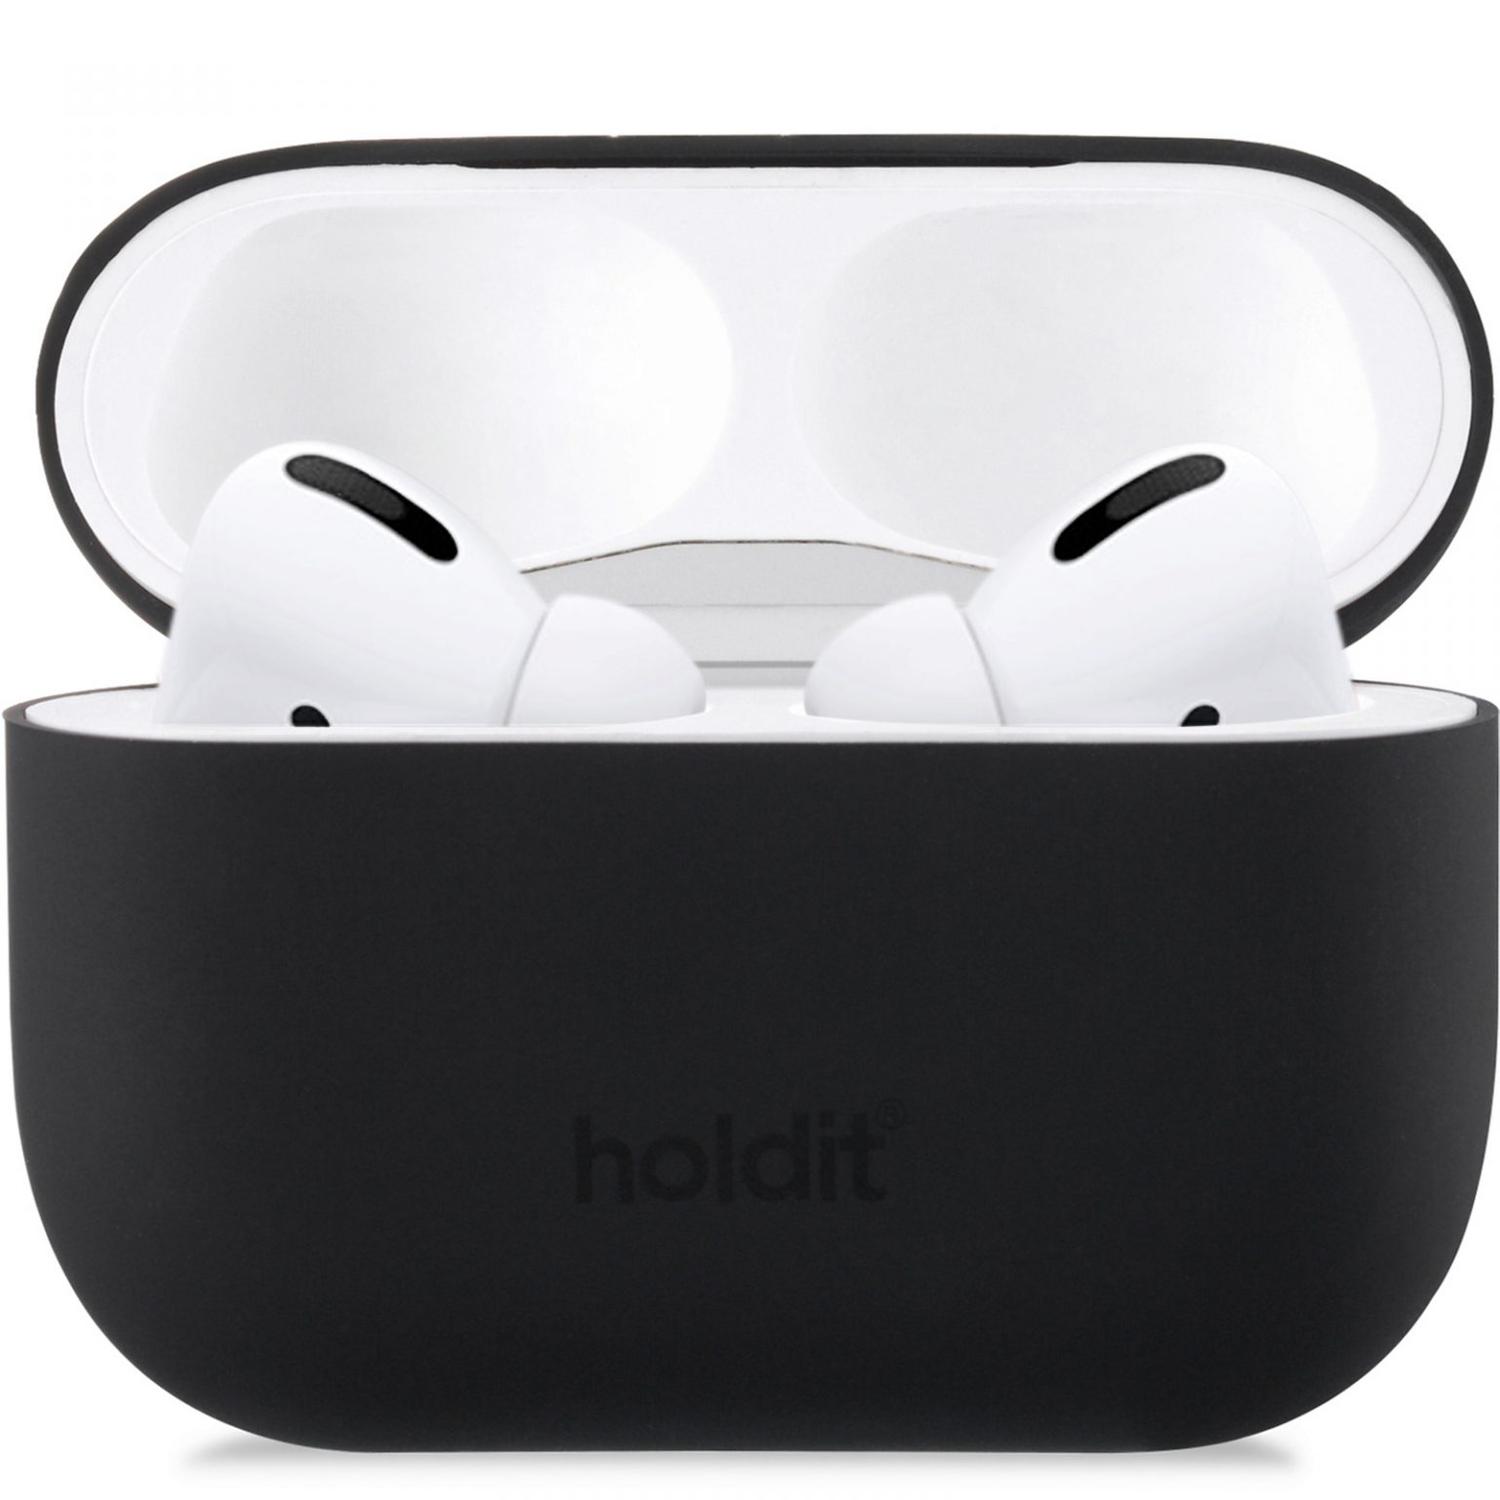 Holdit- SILIKONFODRAL AIRPODS PRO NYGÅRD